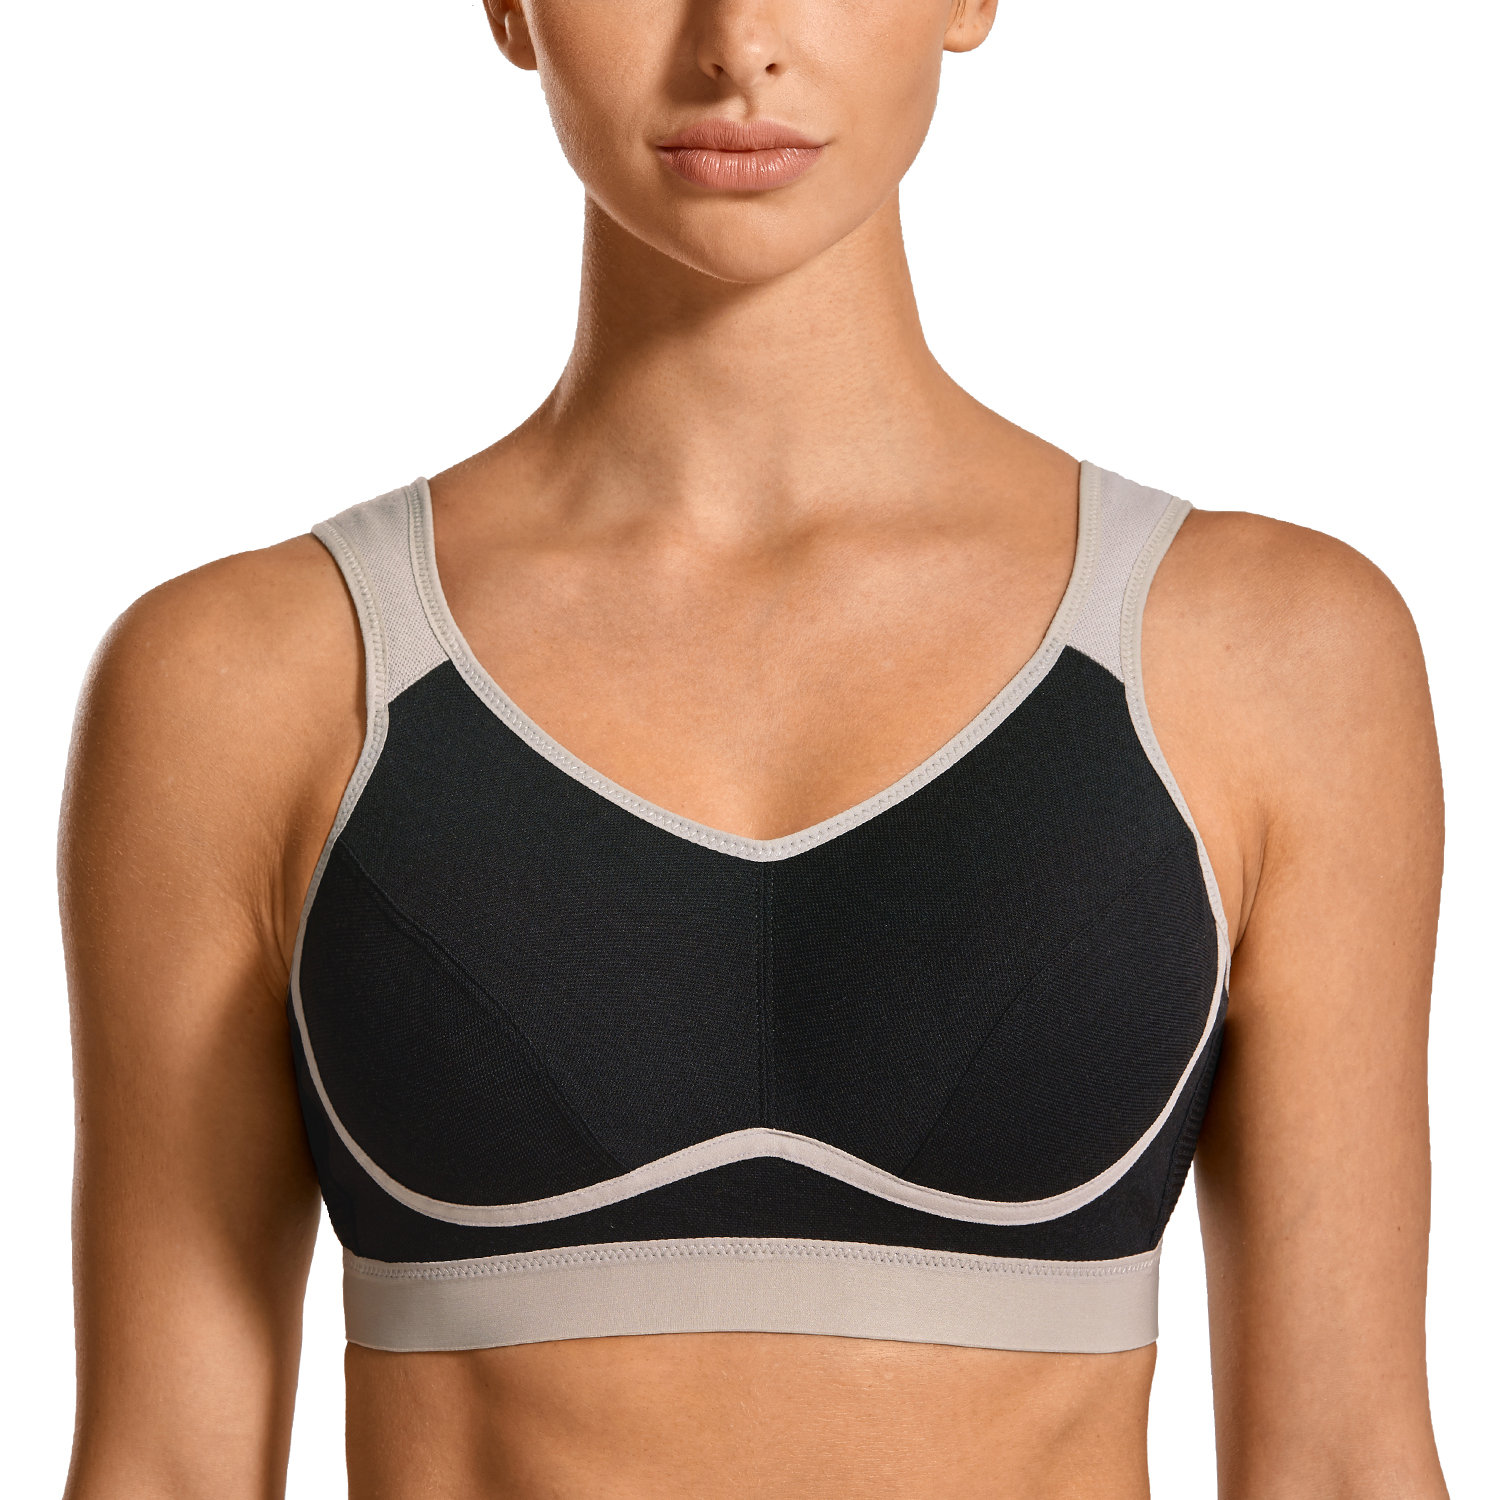 Shop Syrokan High Impact Sports Bra with great discounts and